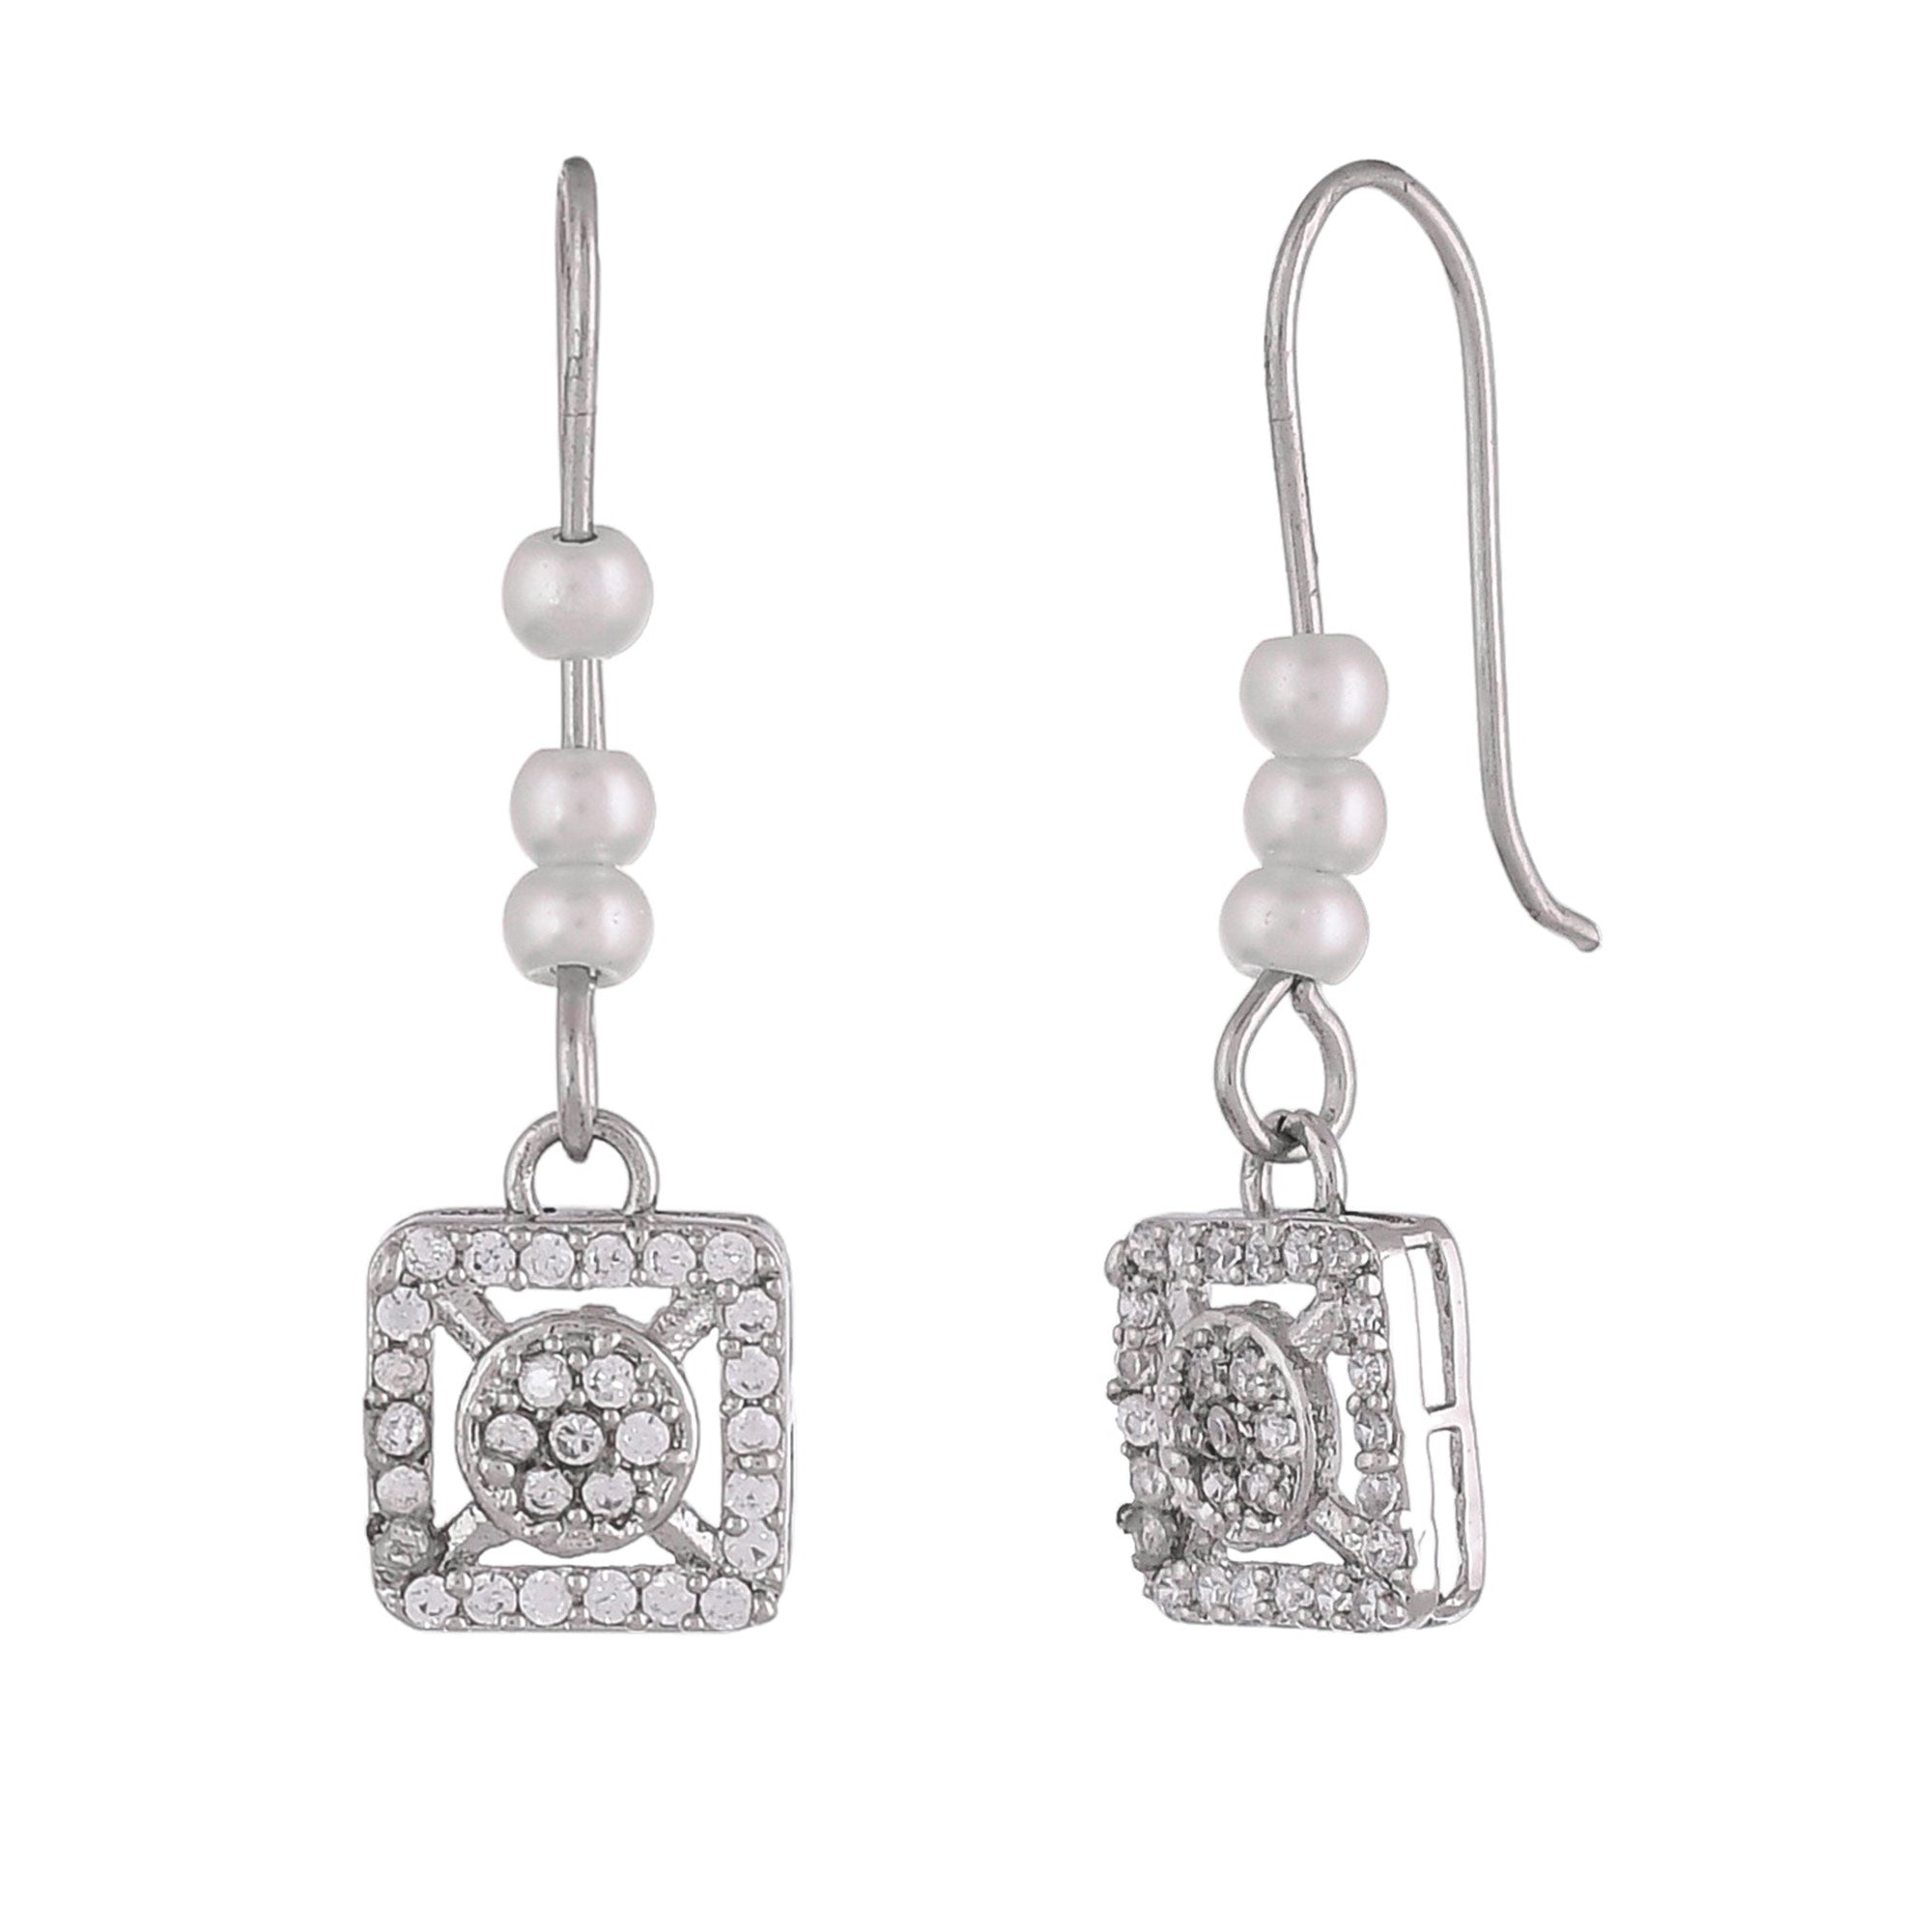 Silver Plated Stylish Cz Earrings